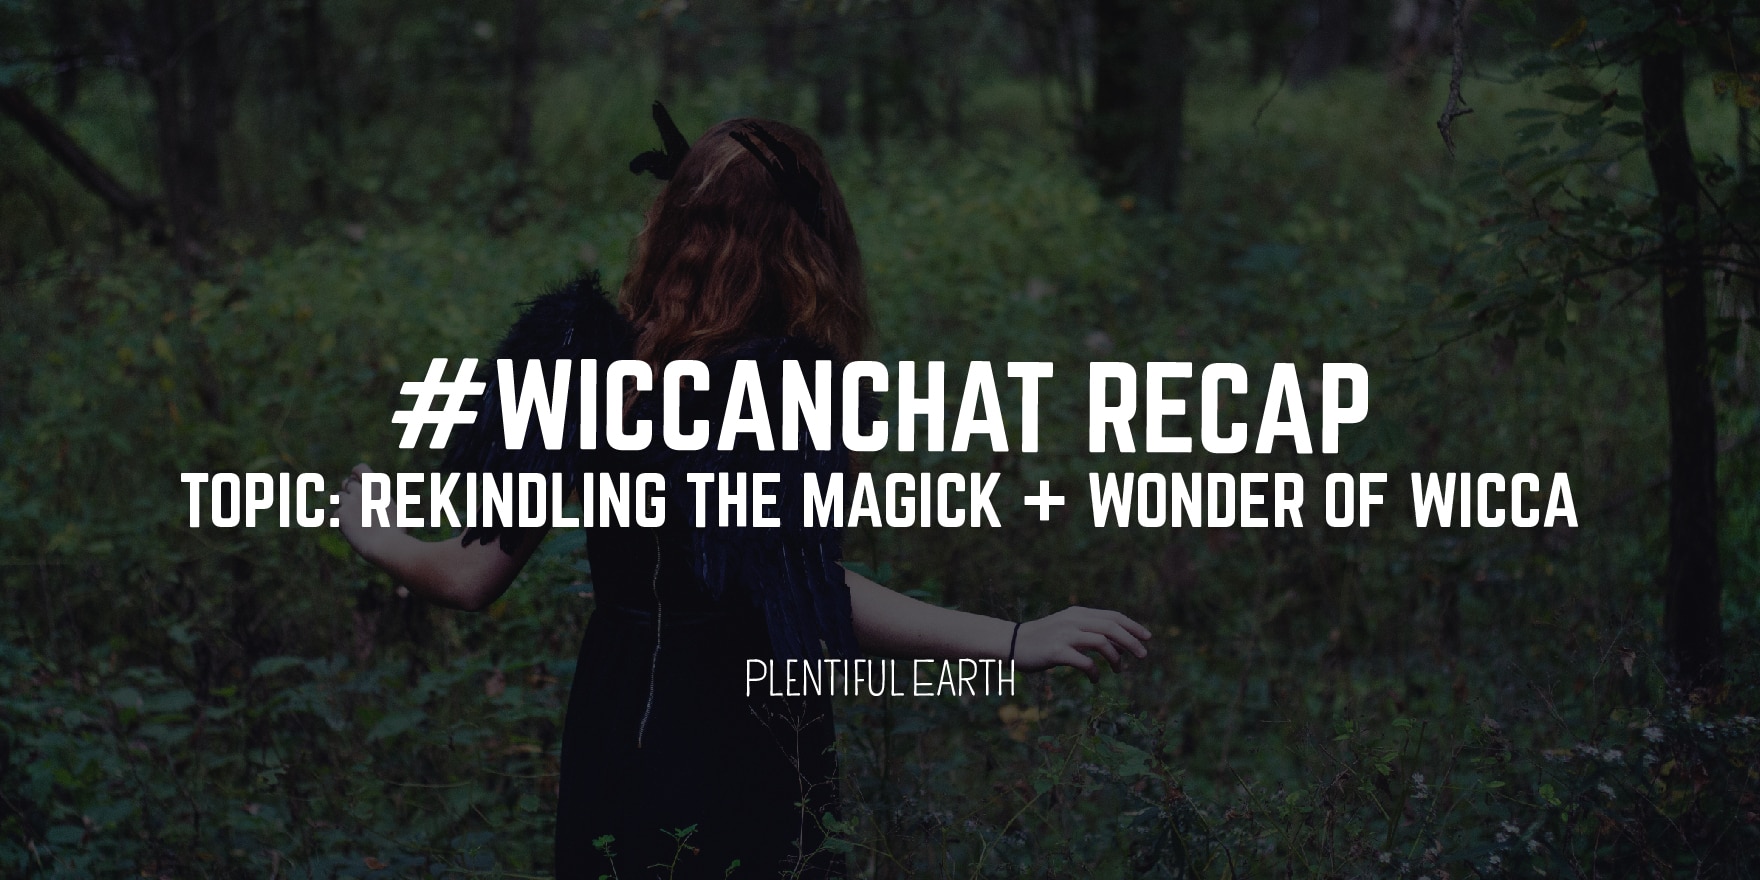 WiccanChat: How to make Wicca fun again